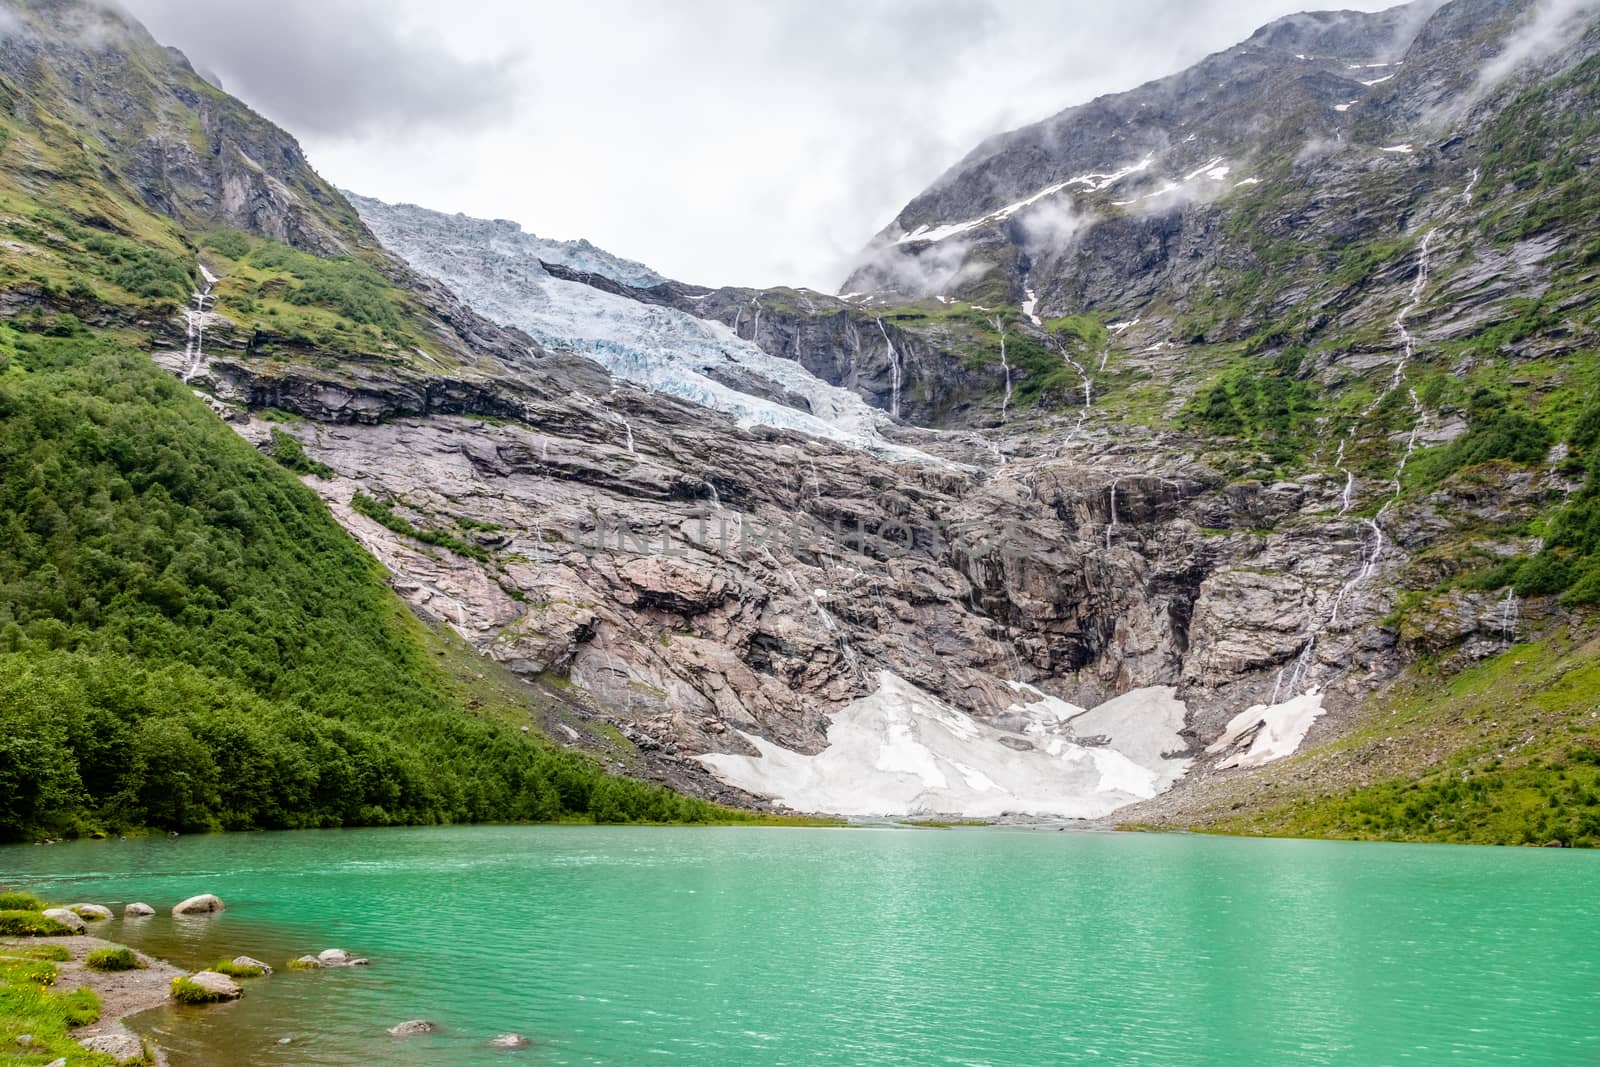 Boeyabreen Glacier in the mountains with lake in the foreground, by ambeon